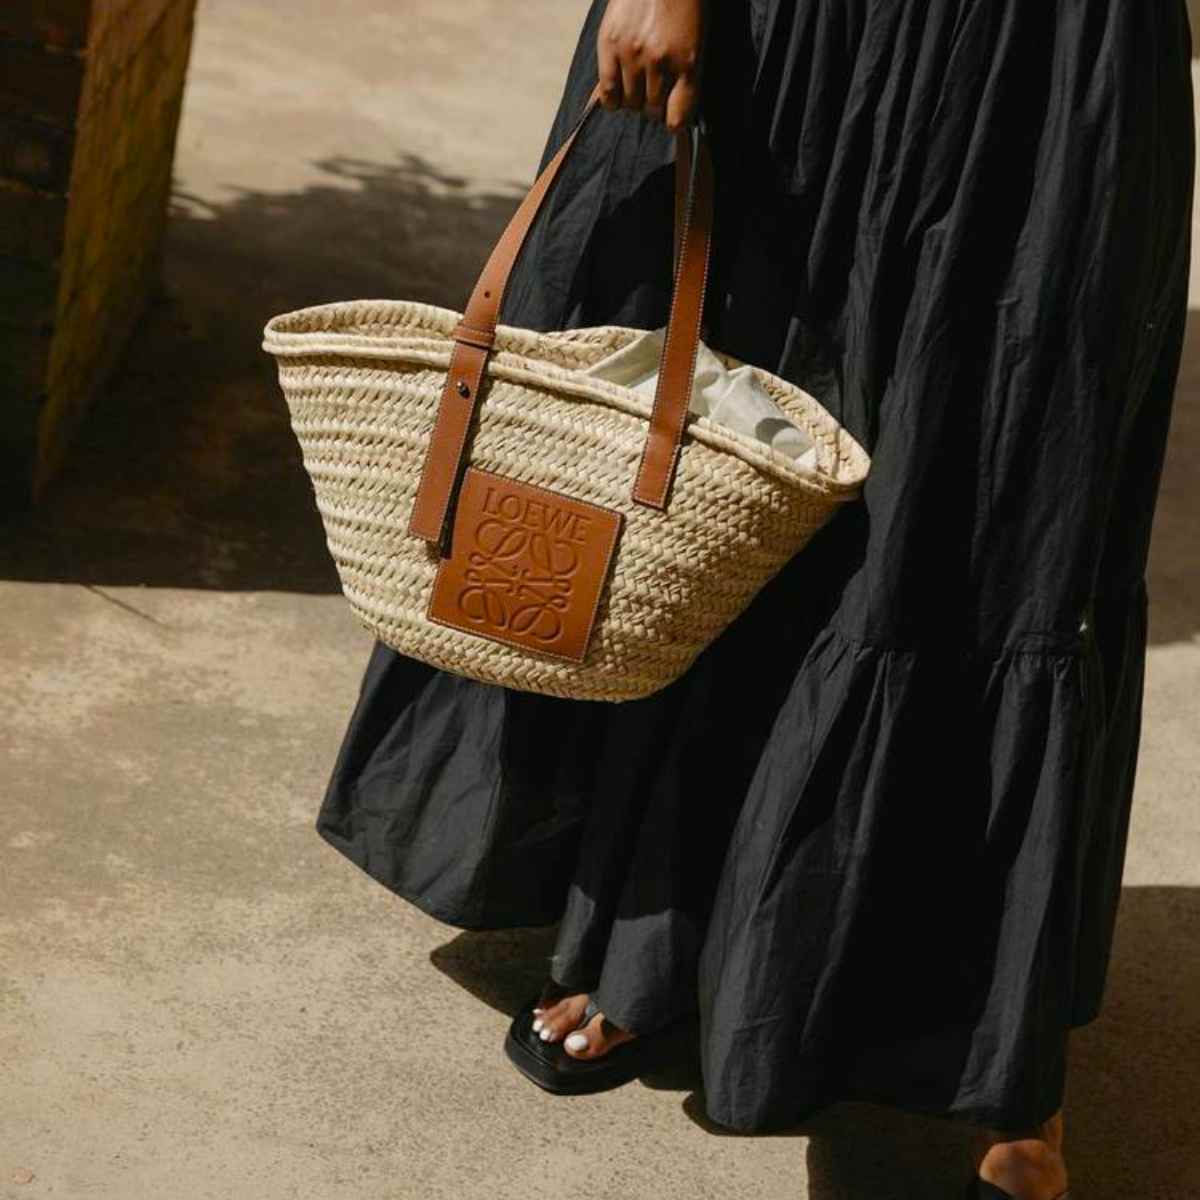 18 of the Best Straw Bags to Invest In This Summer